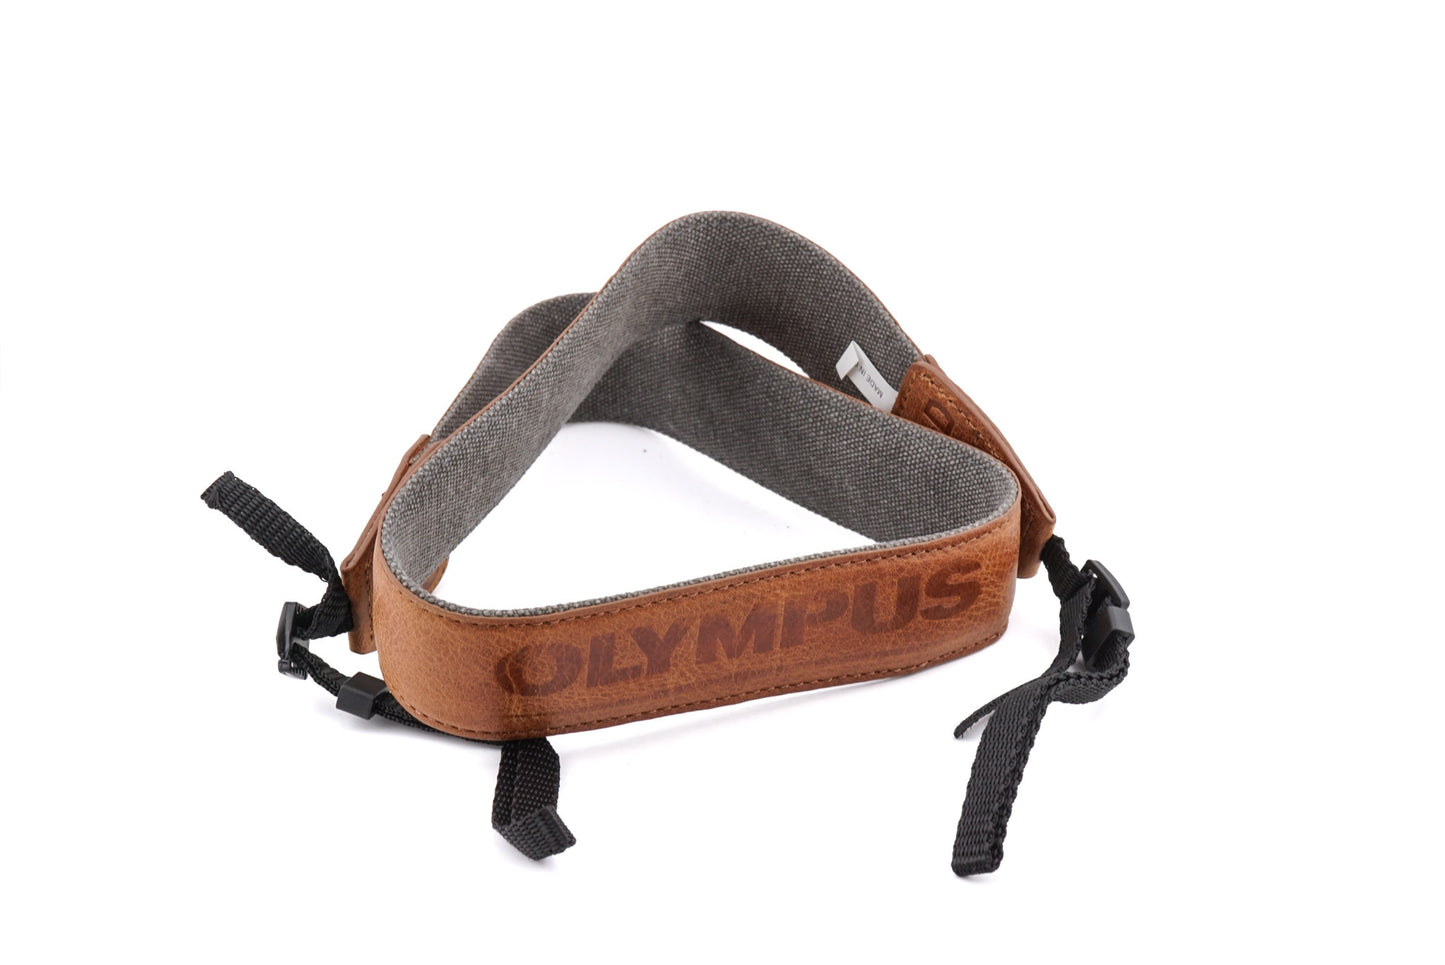 Olympus OM-D Leather Neck Strap - Accessory